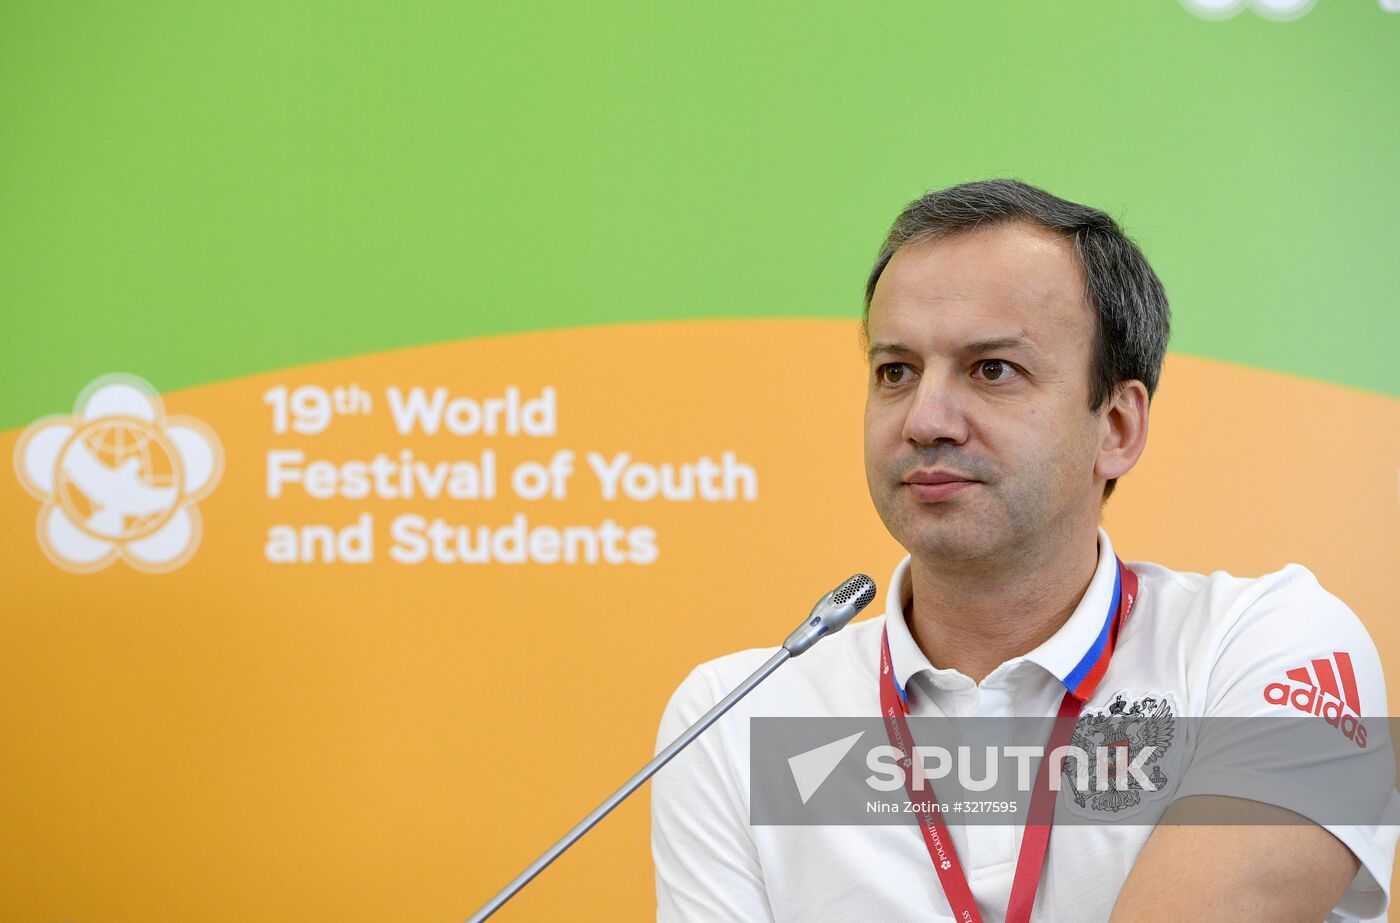 19th World Festival of Youth and Students. Discussion program